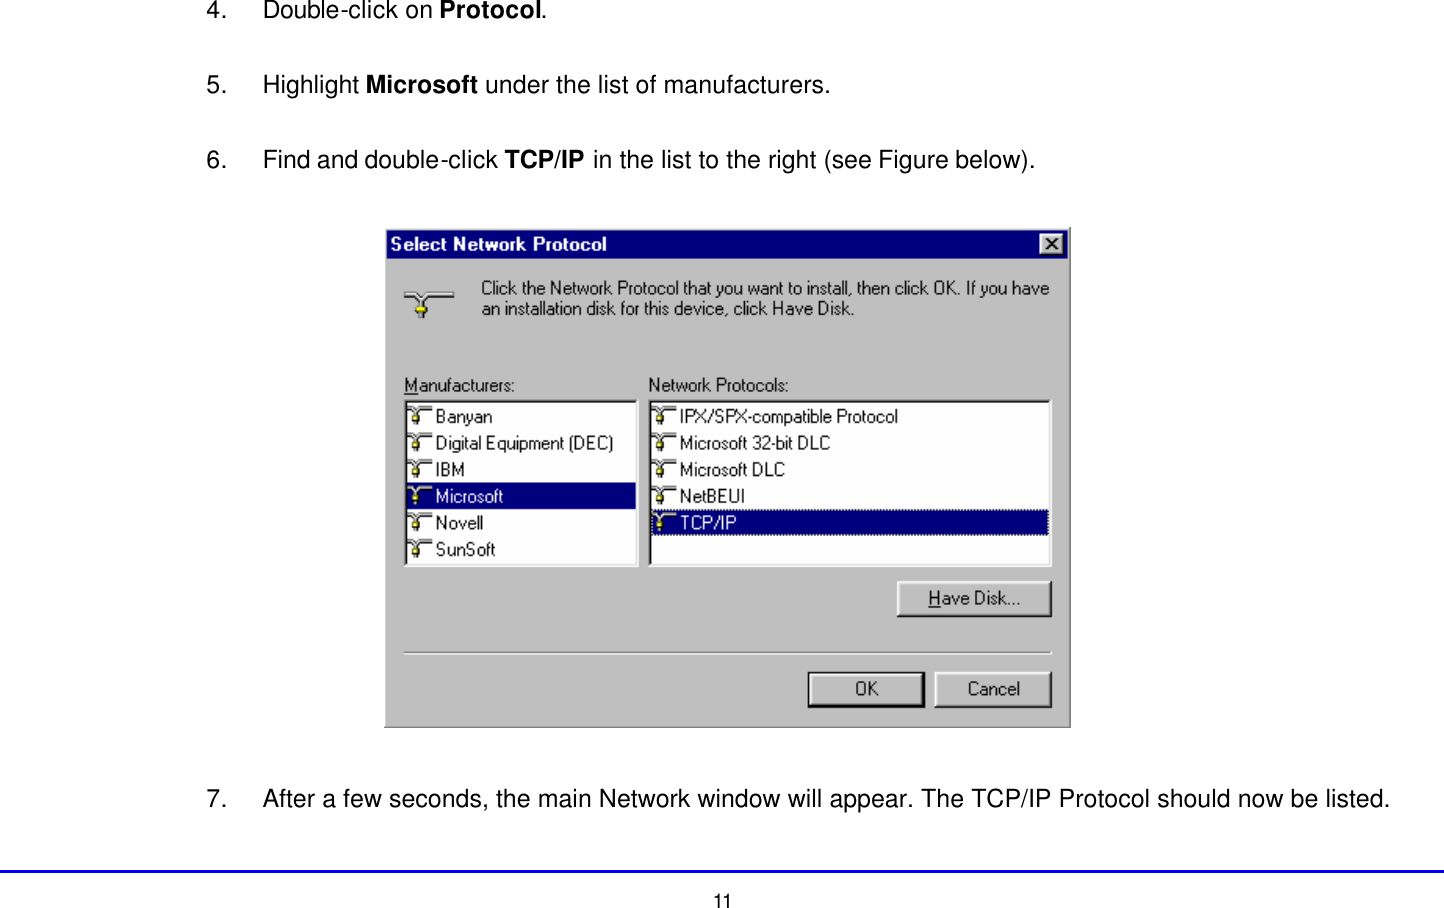  11 4. Double-click on Protocol.  5. Highlight Microsoft under the list of manufacturers.  6. Find and double-click TCP/IP in the list to the right (see Figure below).    7. After a few seconds, the main Network window will appear. The TCP/IP Protocol should now be listed. 